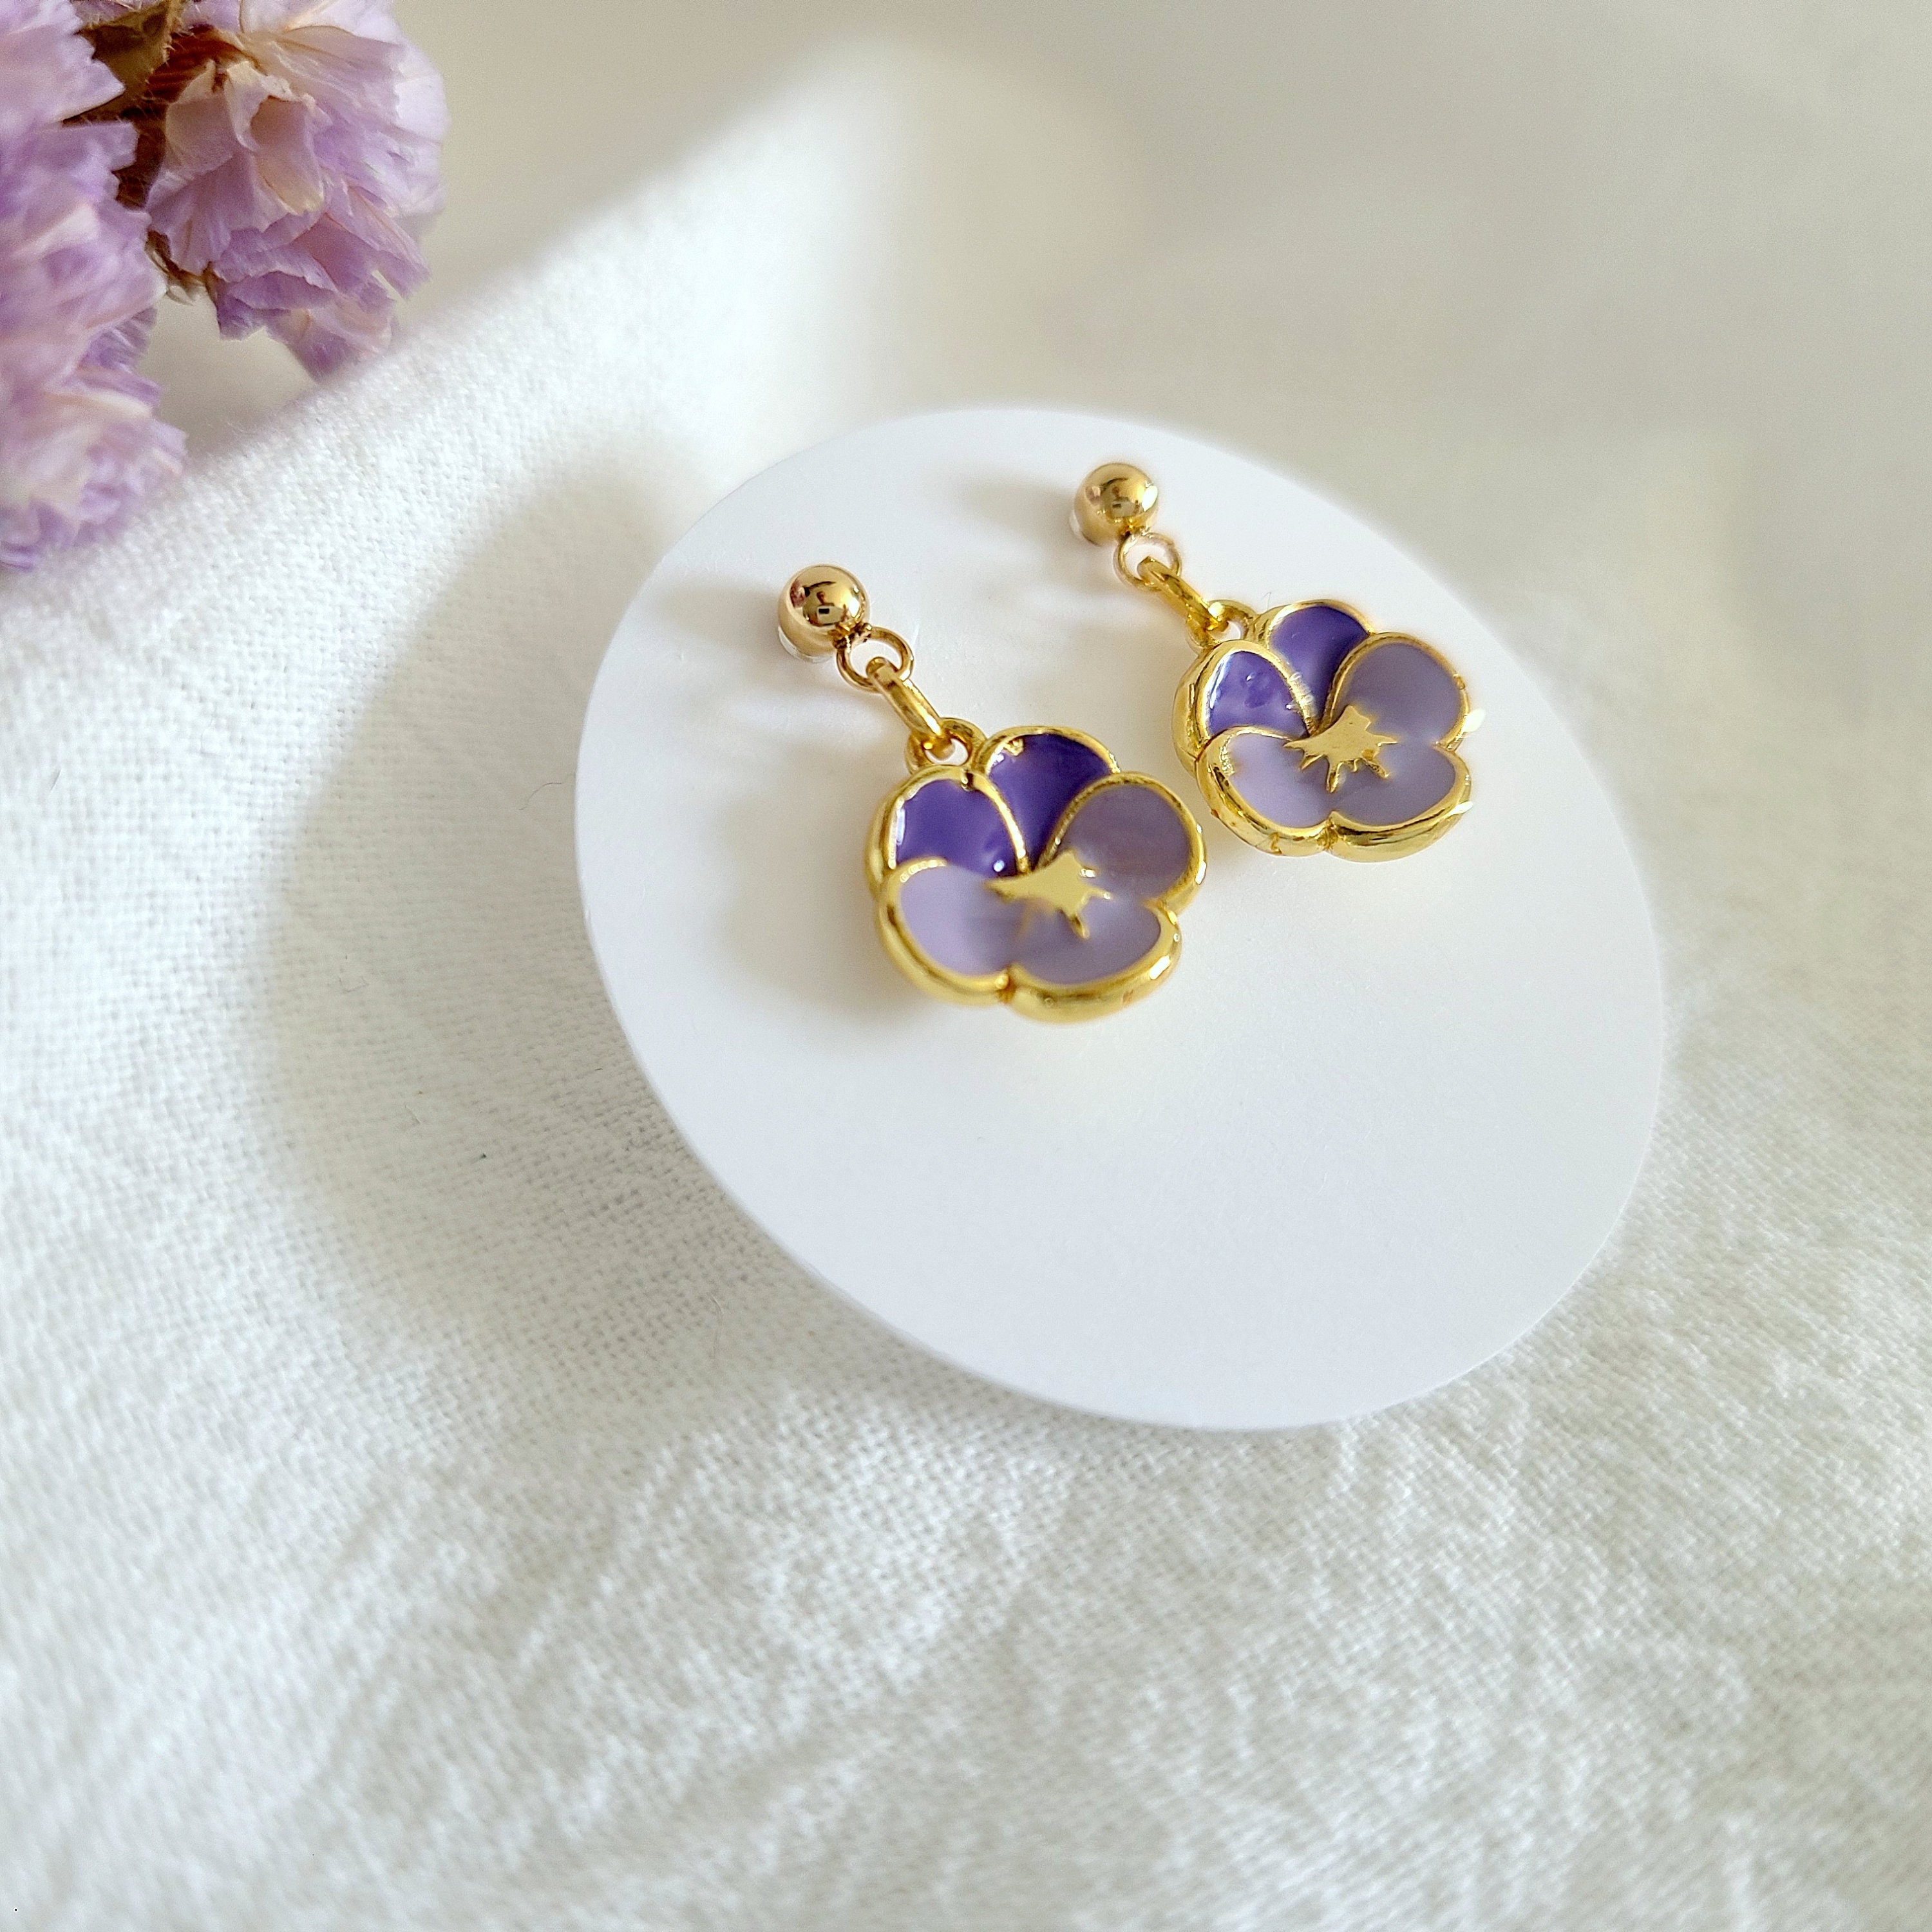 Dangling earrings with purple flower pendants, children's jewelry, girl's  jewelry gift, goddaughter Christmas gift idea, niece gift